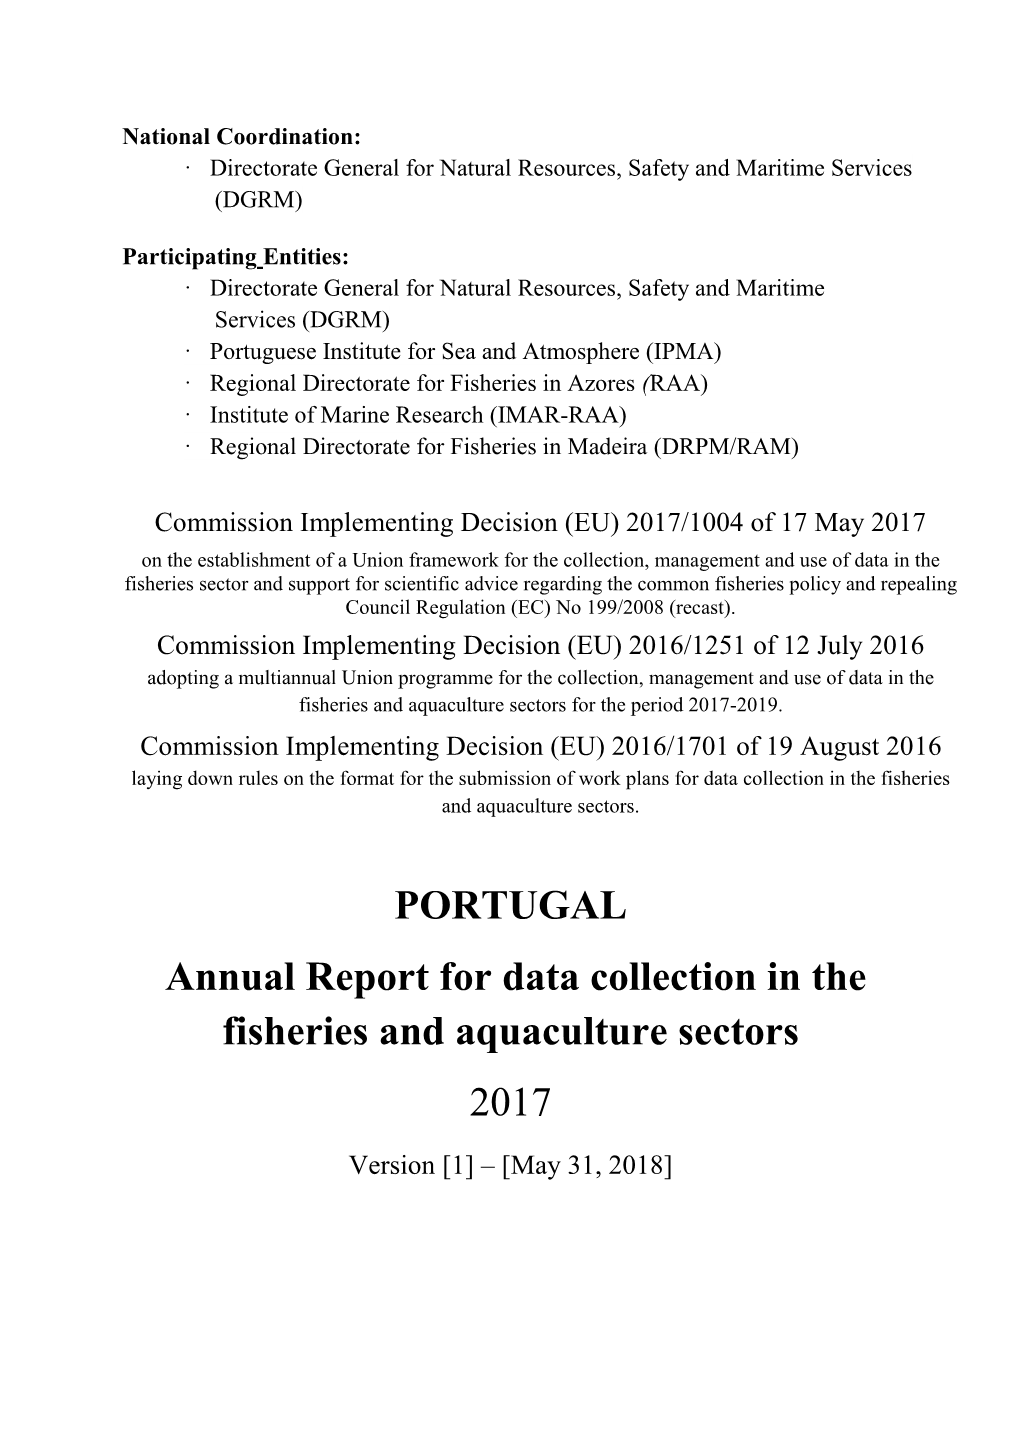 PORTUGAL Annual Report for Data Collection in the Fisheries and Aquaculture Sectors 2017